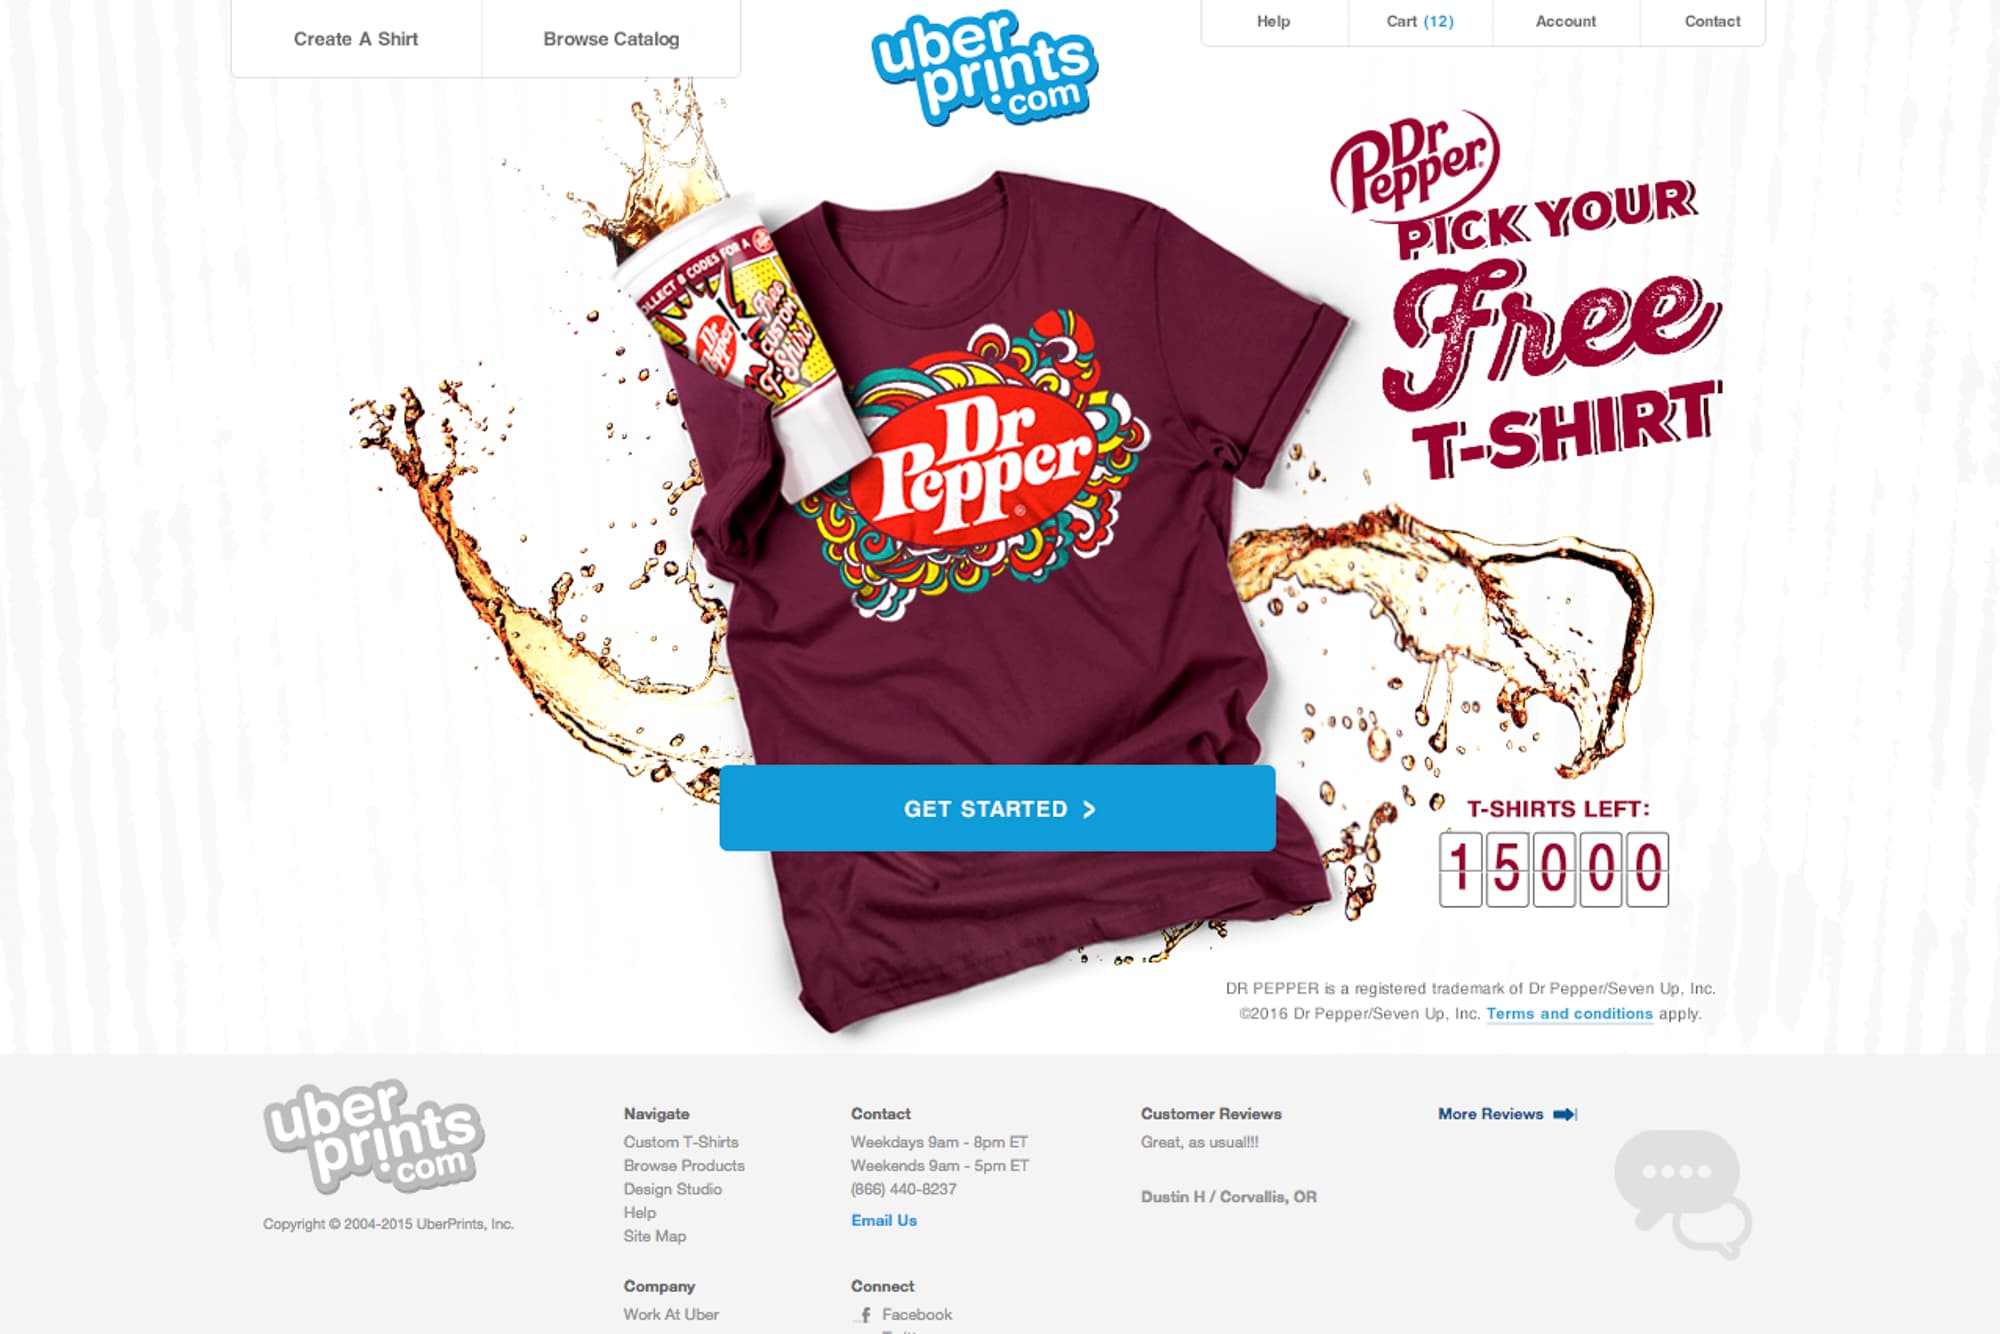 Mockup of the UberPrints website for the "Pick Your Pepper" campaign.